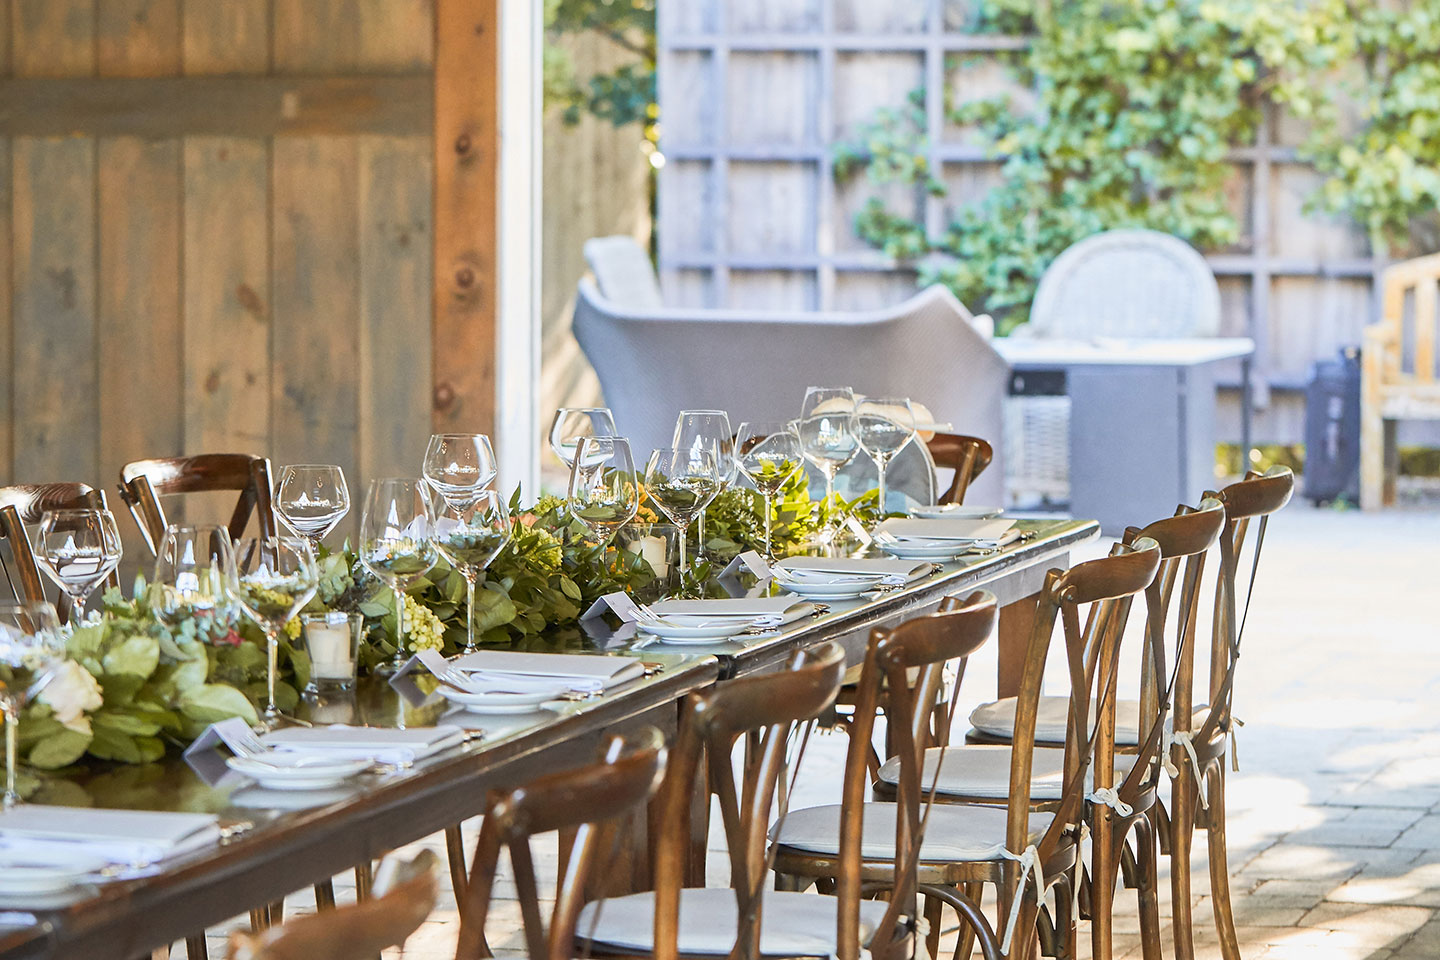 A harvest table prepared for dinner in an outside space